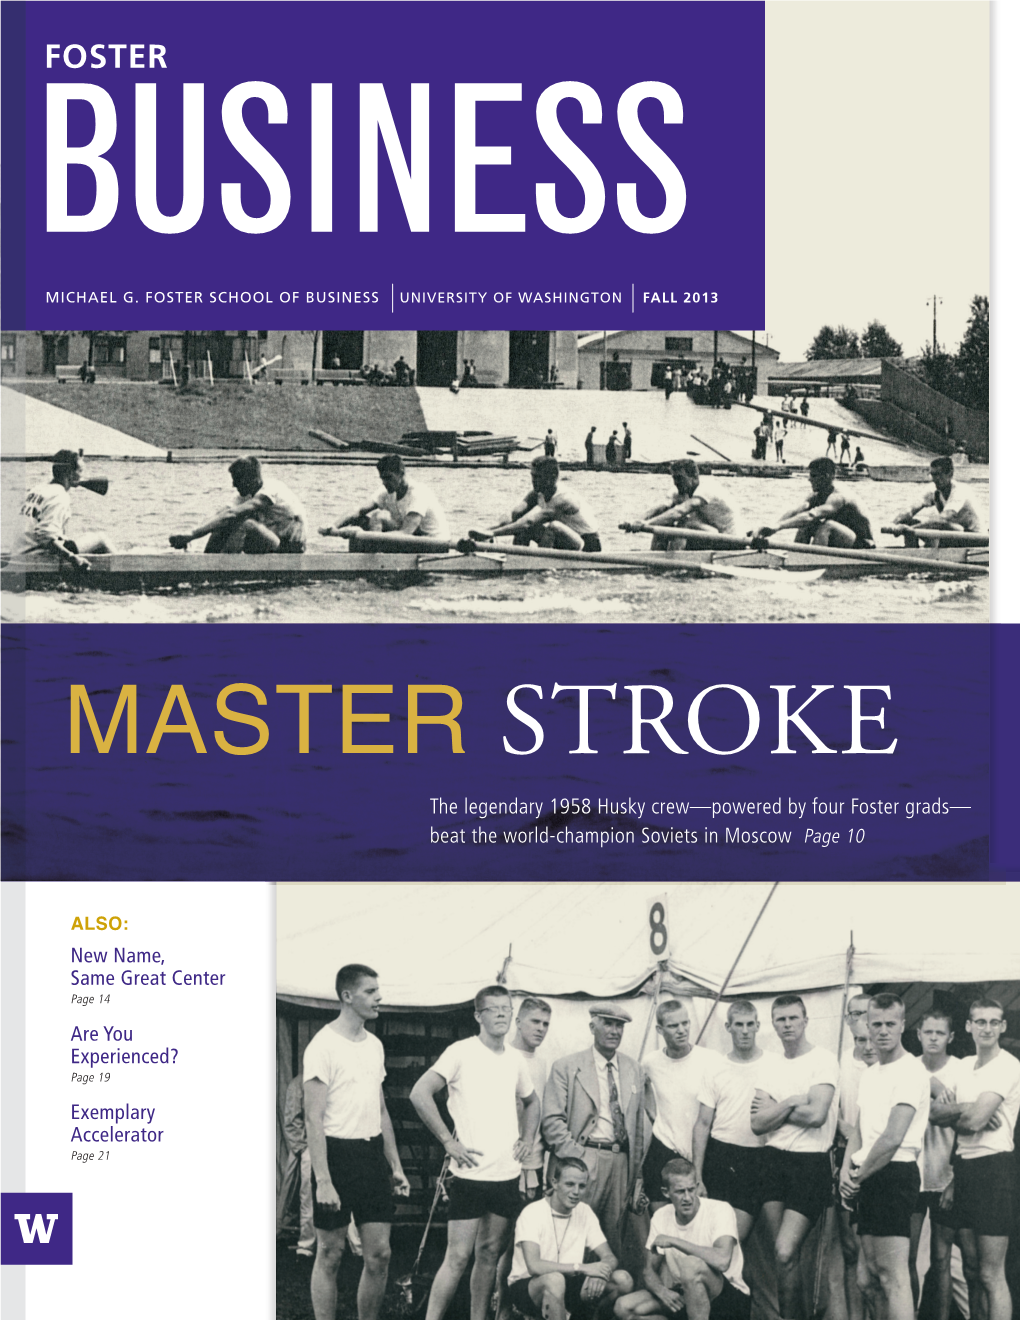 MASTER STROKE the Legendary 1958 Husky Crew—Powered by Four Foster Grads— Beat the World-Champion Soviets in Moscow Page 10